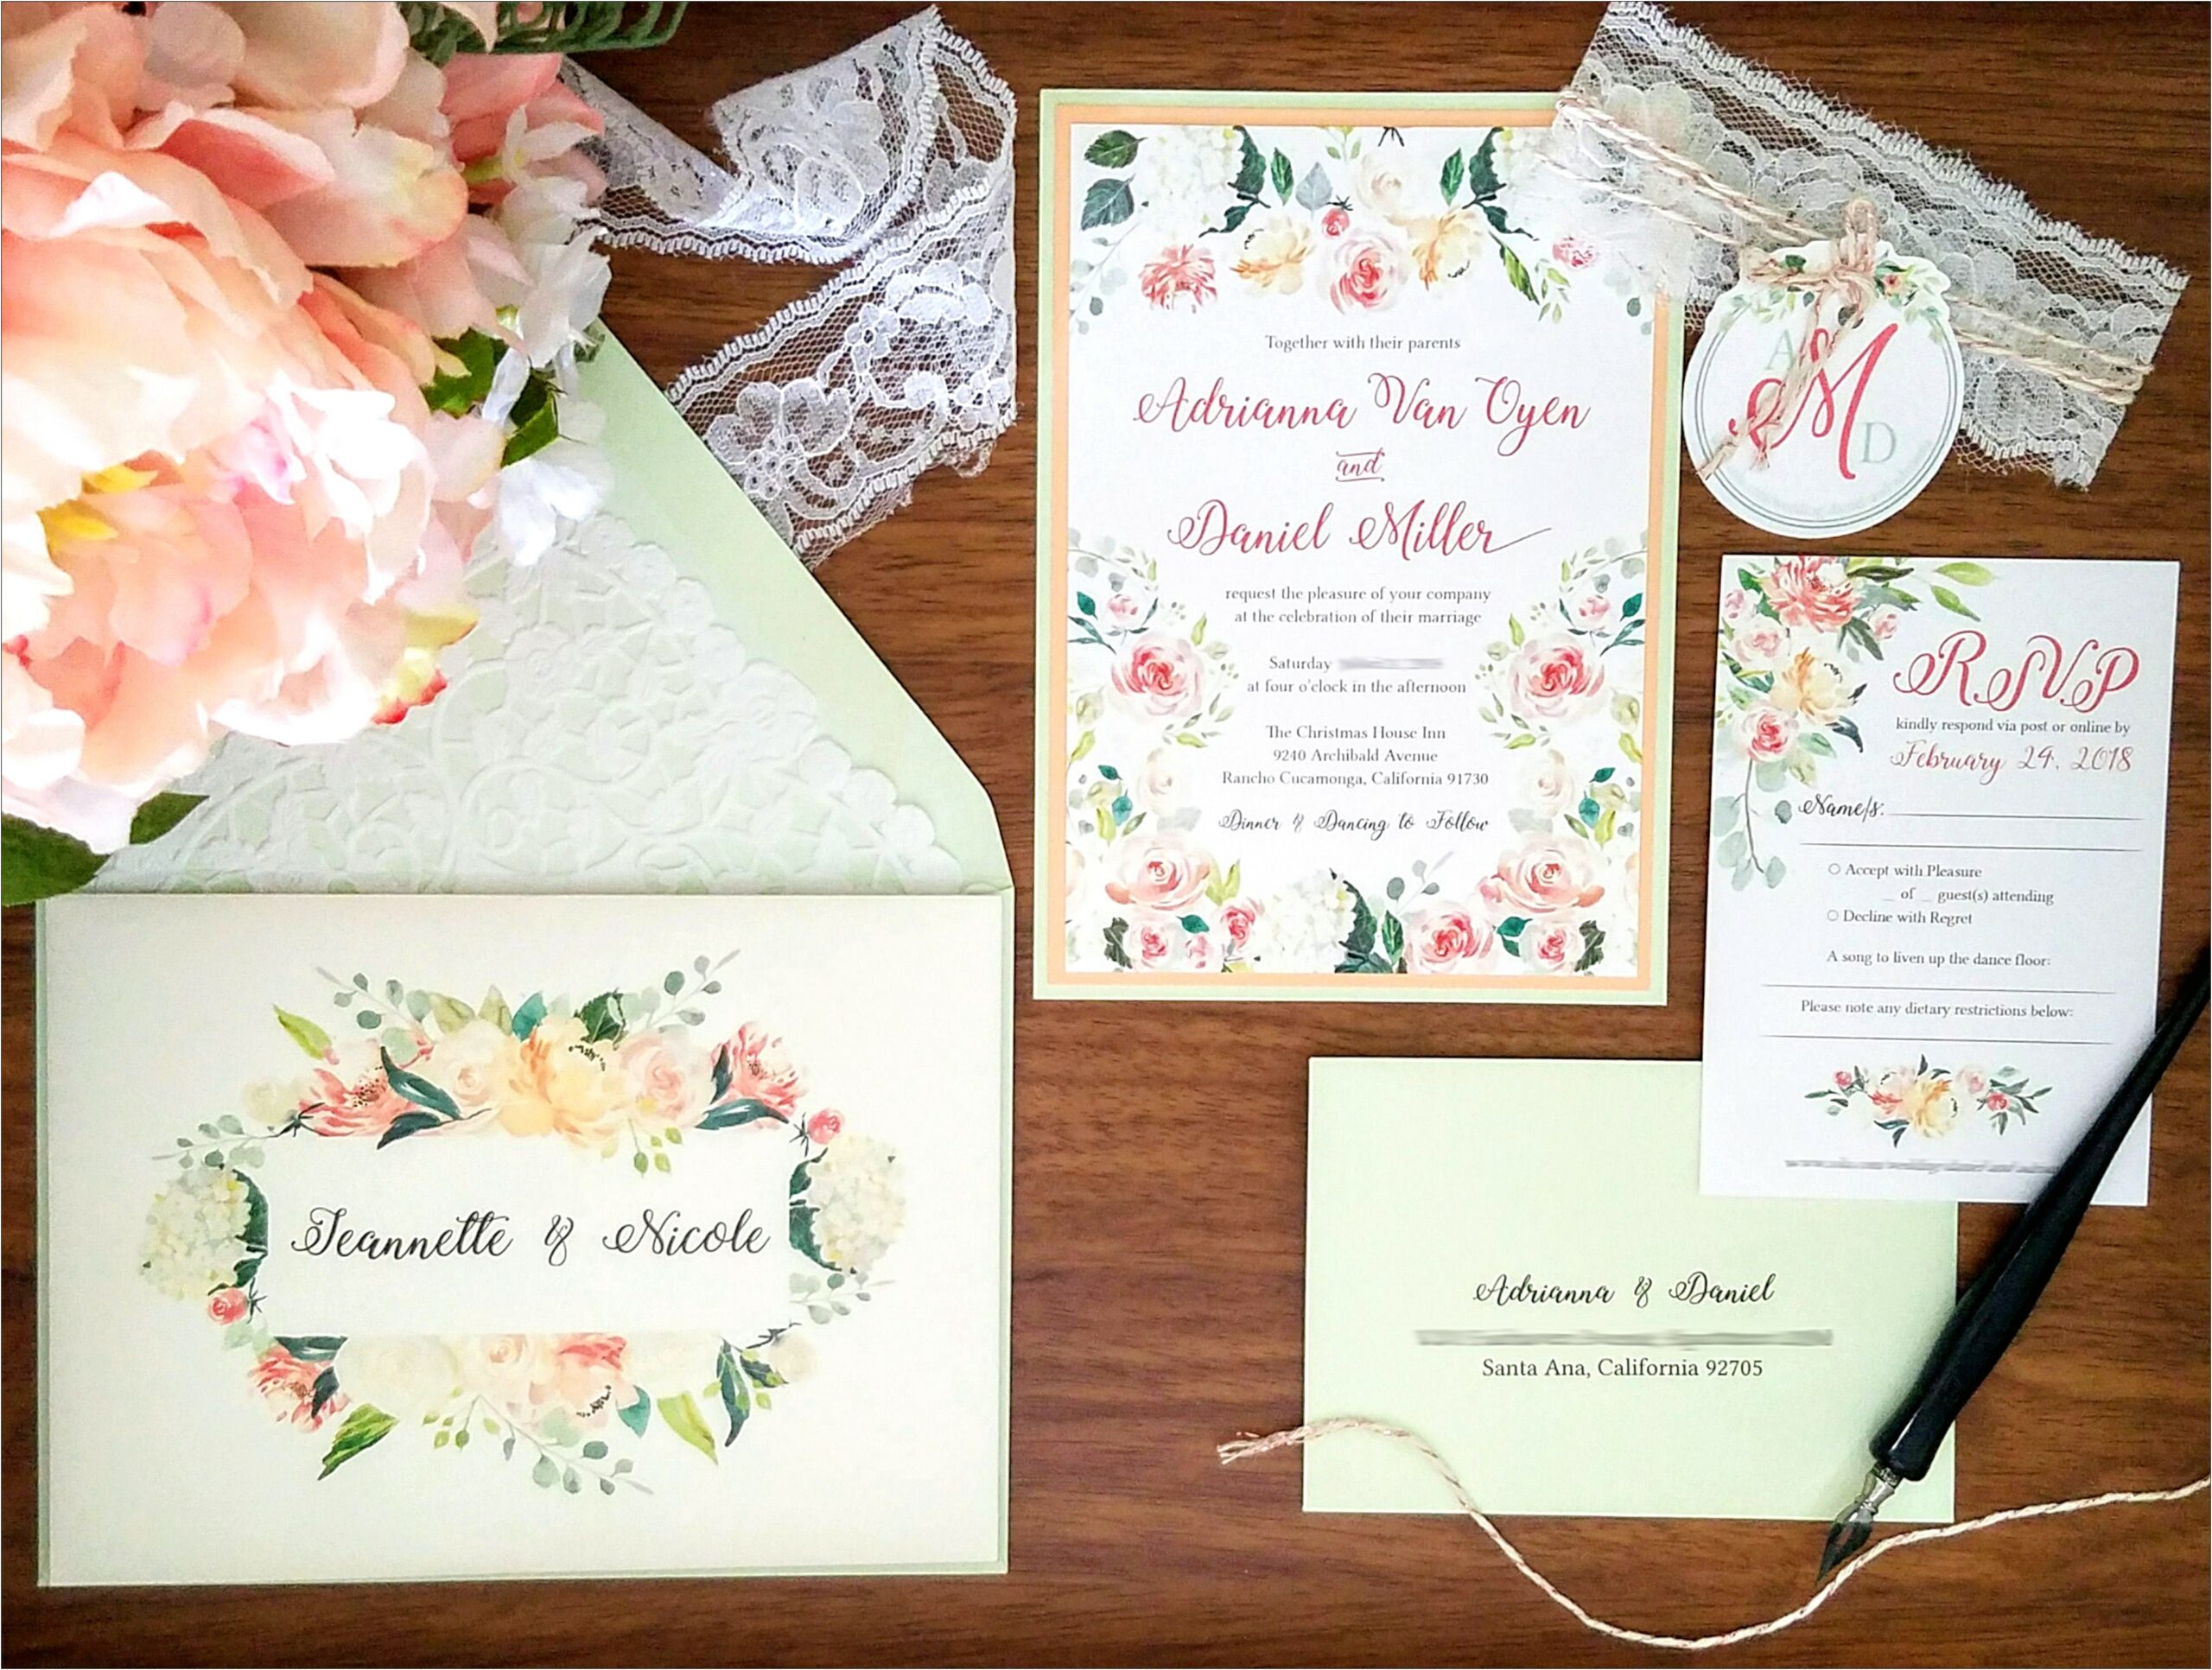 Does Minted Offer Inner Envelopes With Wedding Invitations